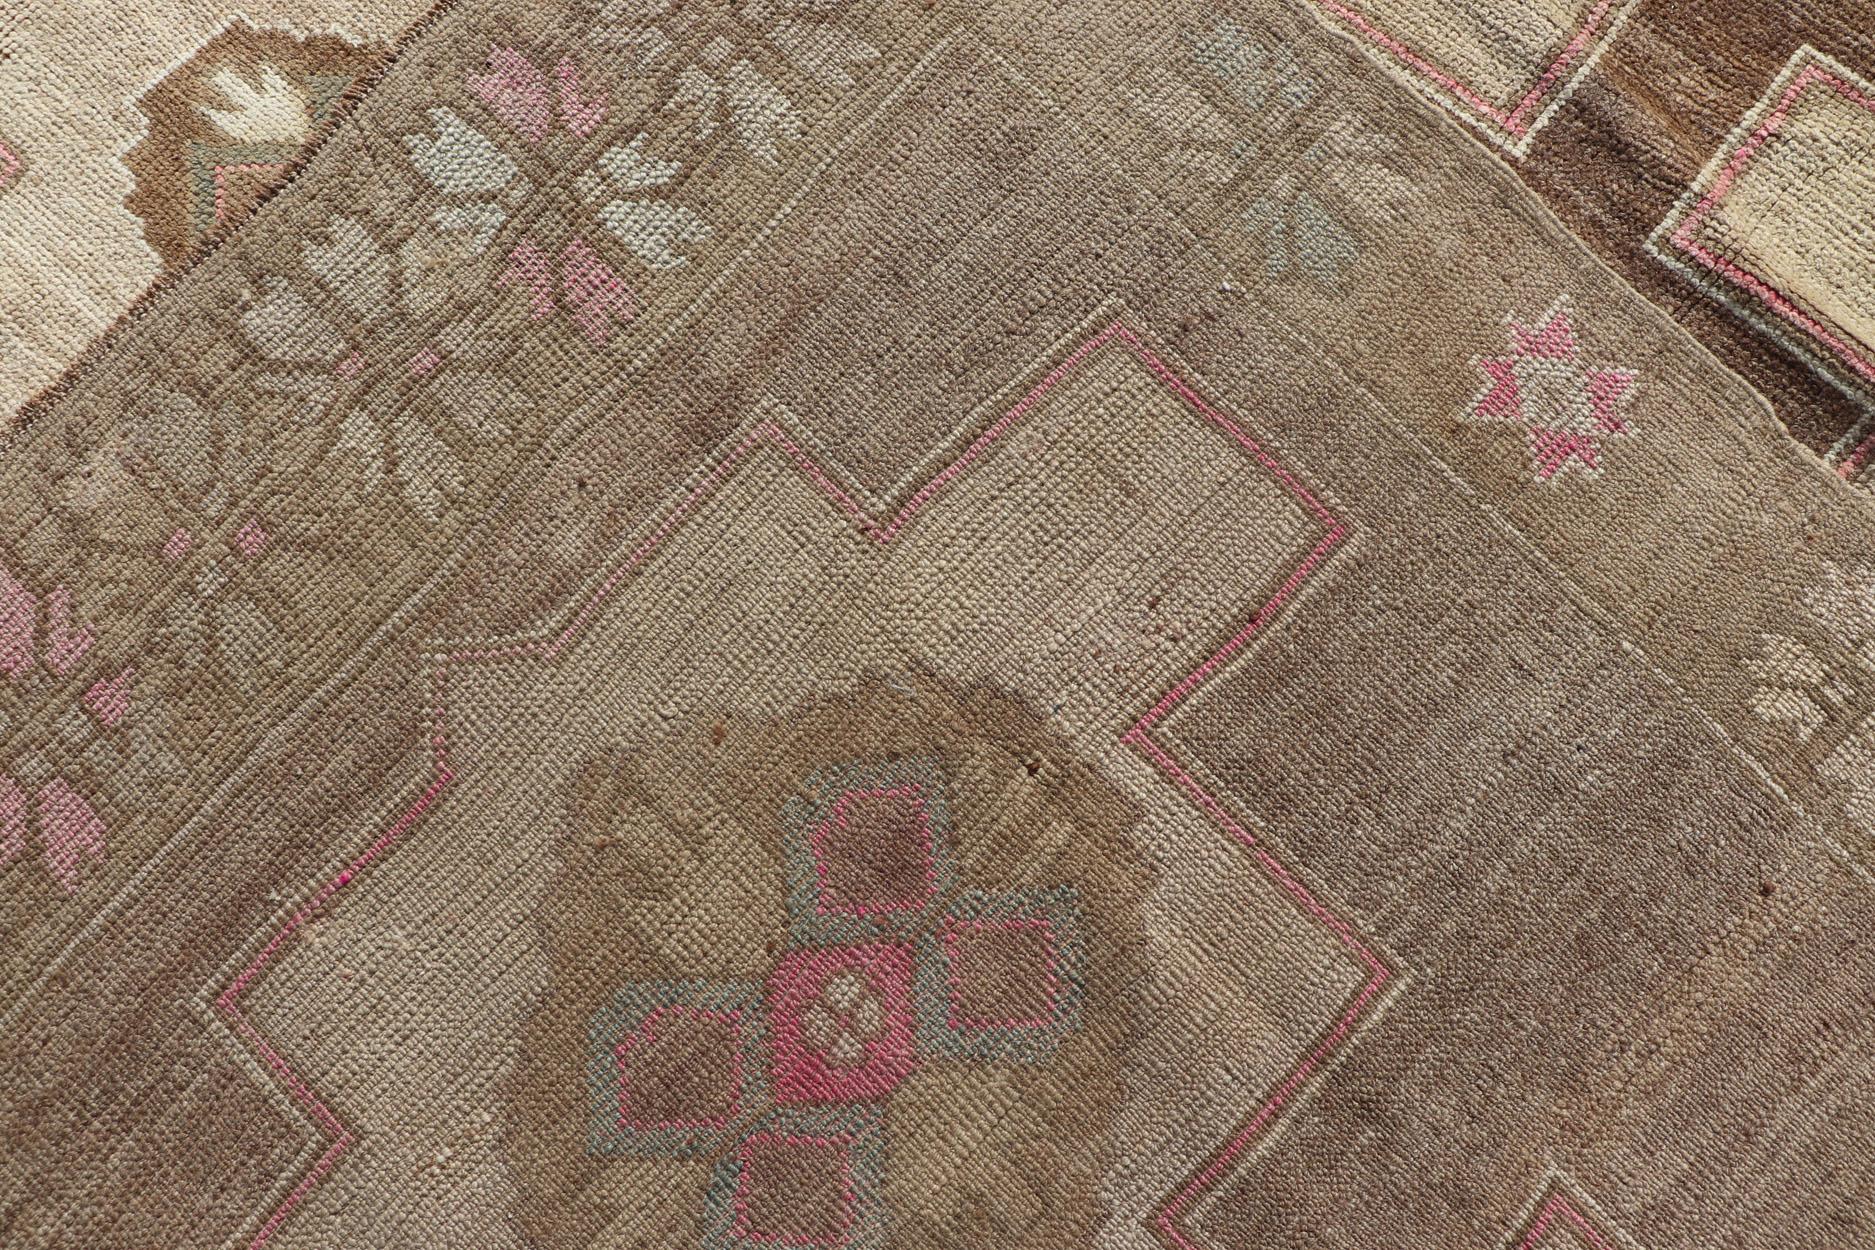 Vintage Kars Wide Gallery Rug in Brown Colors, Tan, Taupe and Light Green In Good Condition For Sale In Atlanta, GA